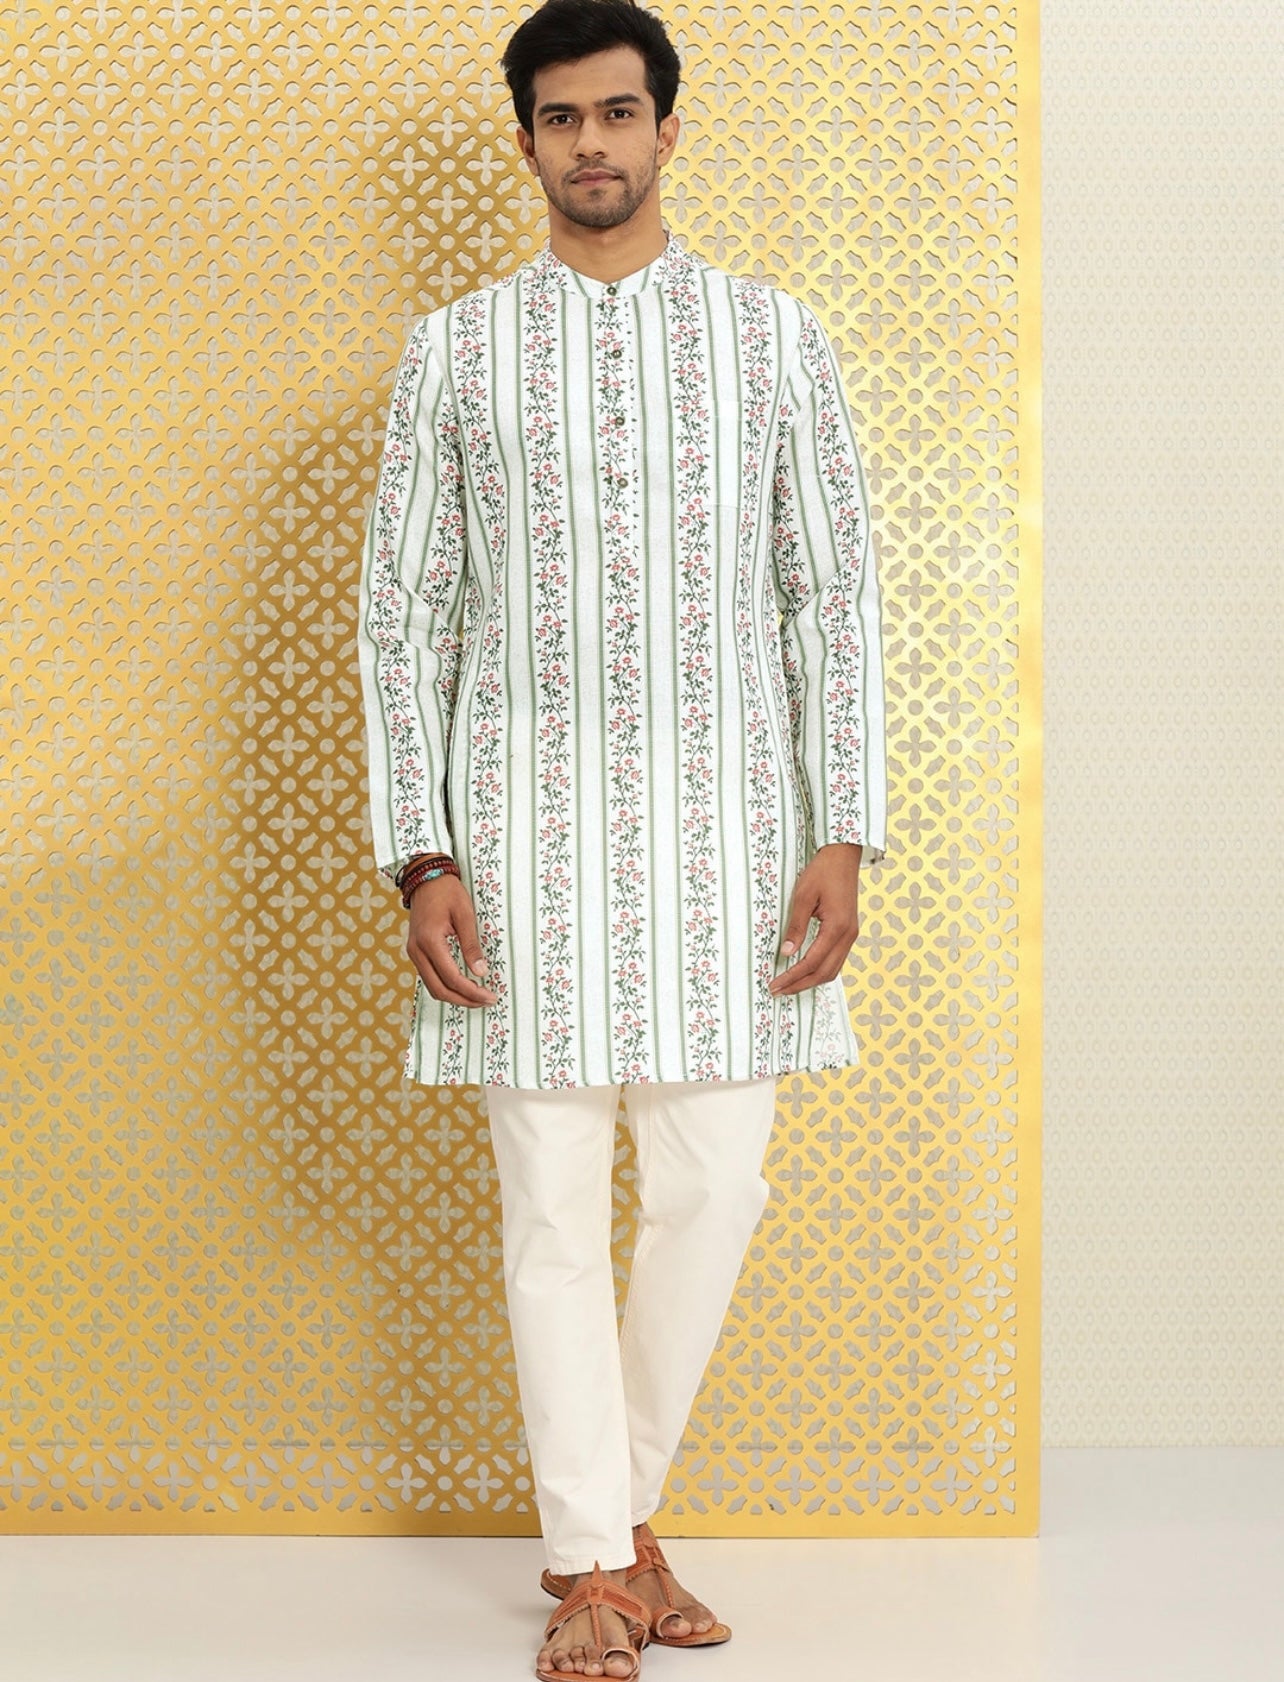 Men's Stylish Off White and Green Floral Kurta